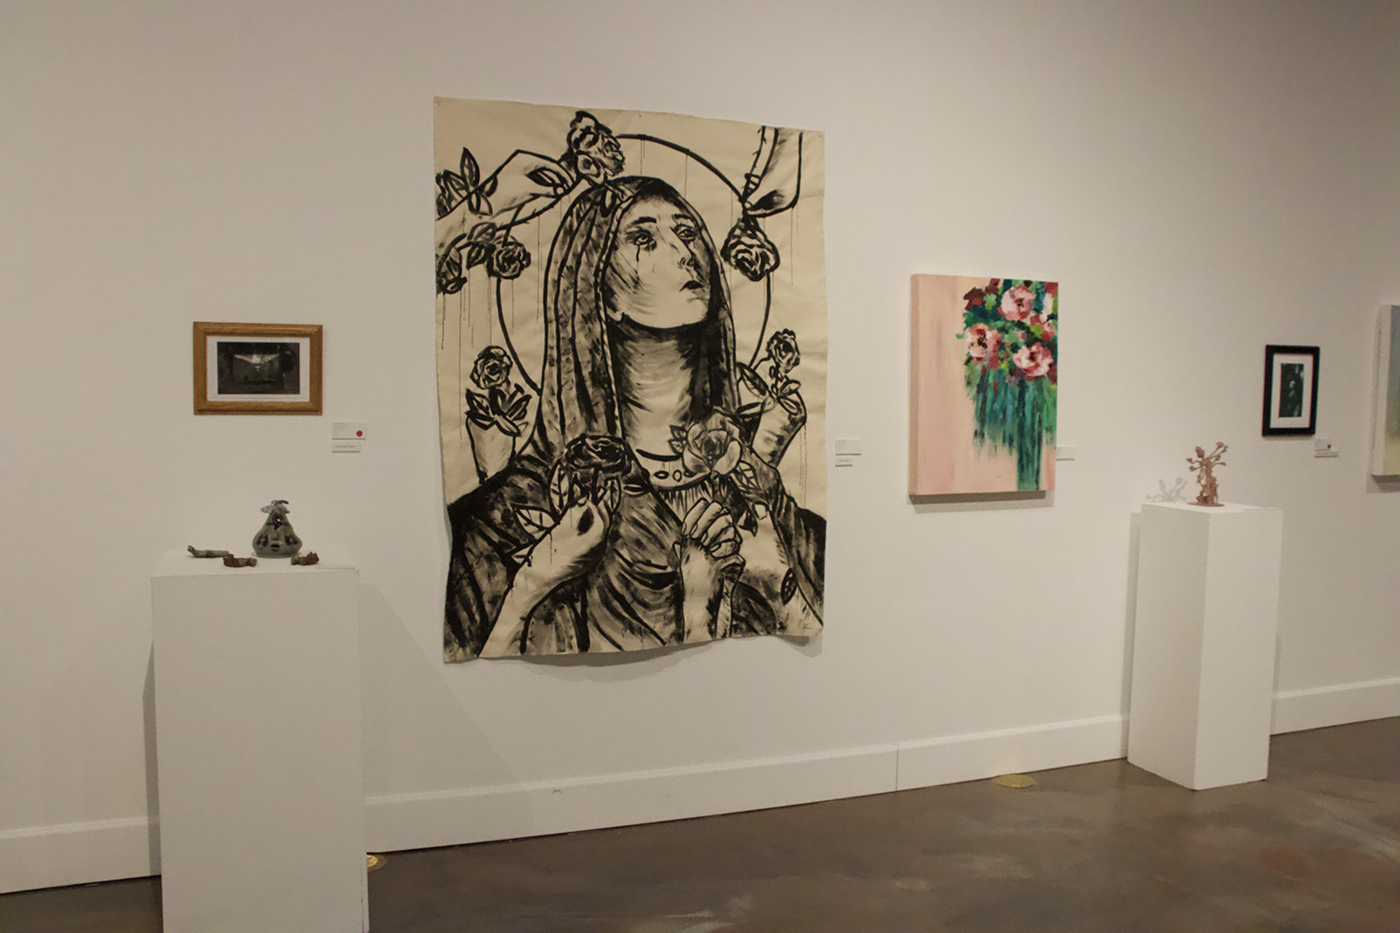 USD art students awarded in the Stilwell Art Exhibition